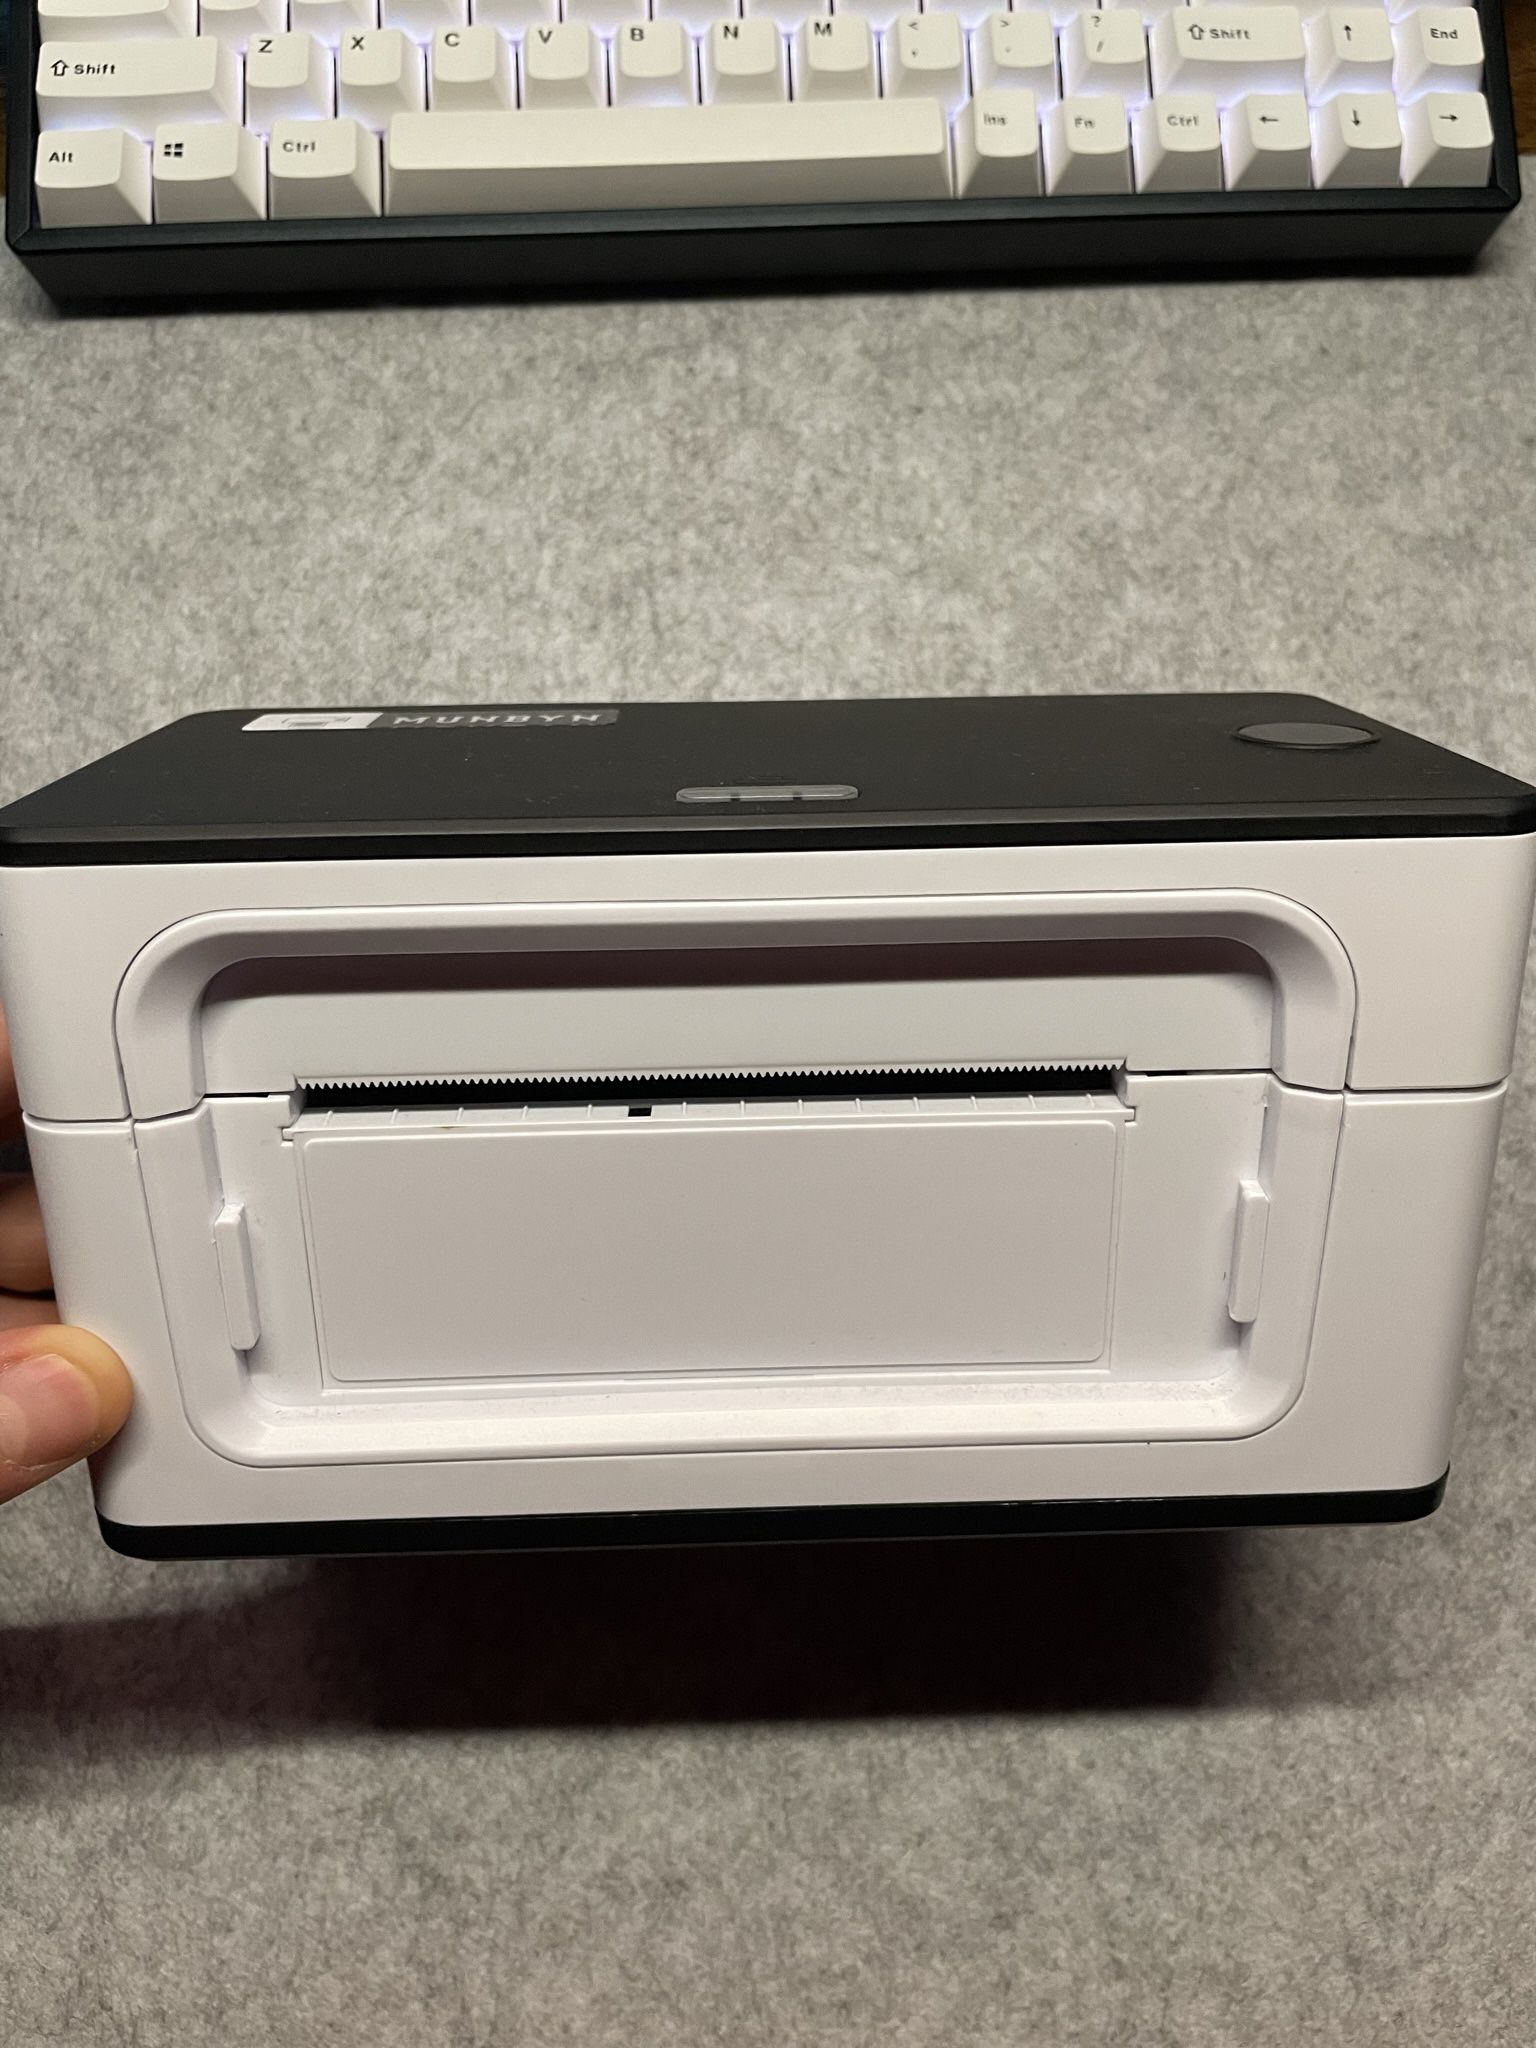 Munbyn Thermal Printer for Sale in Pompano Beach, FL OfferUp